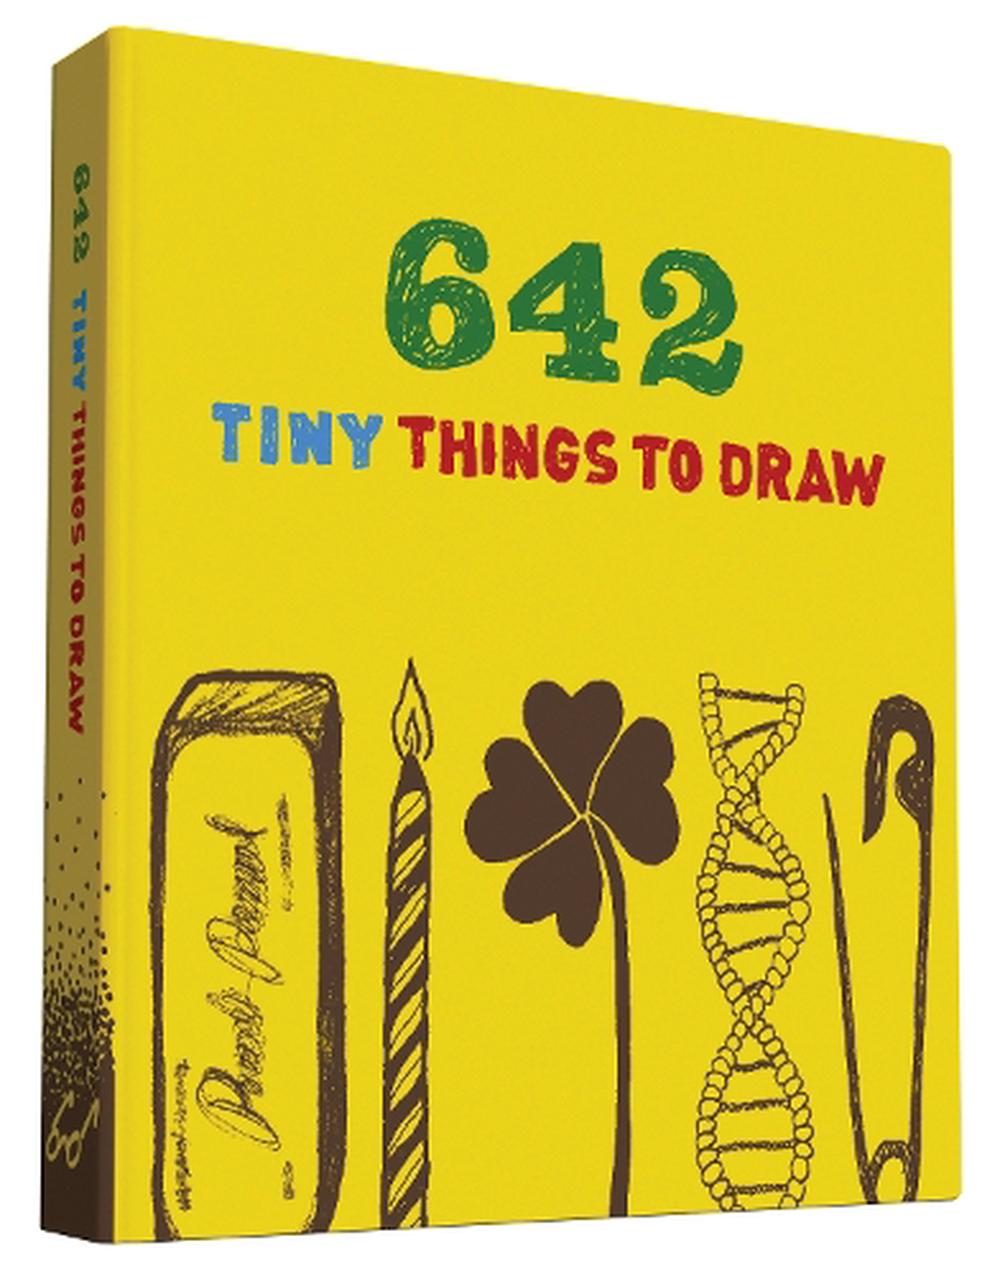 642 Tiny Things to Draw by Chronicle Books, 9781452137575 Buy online